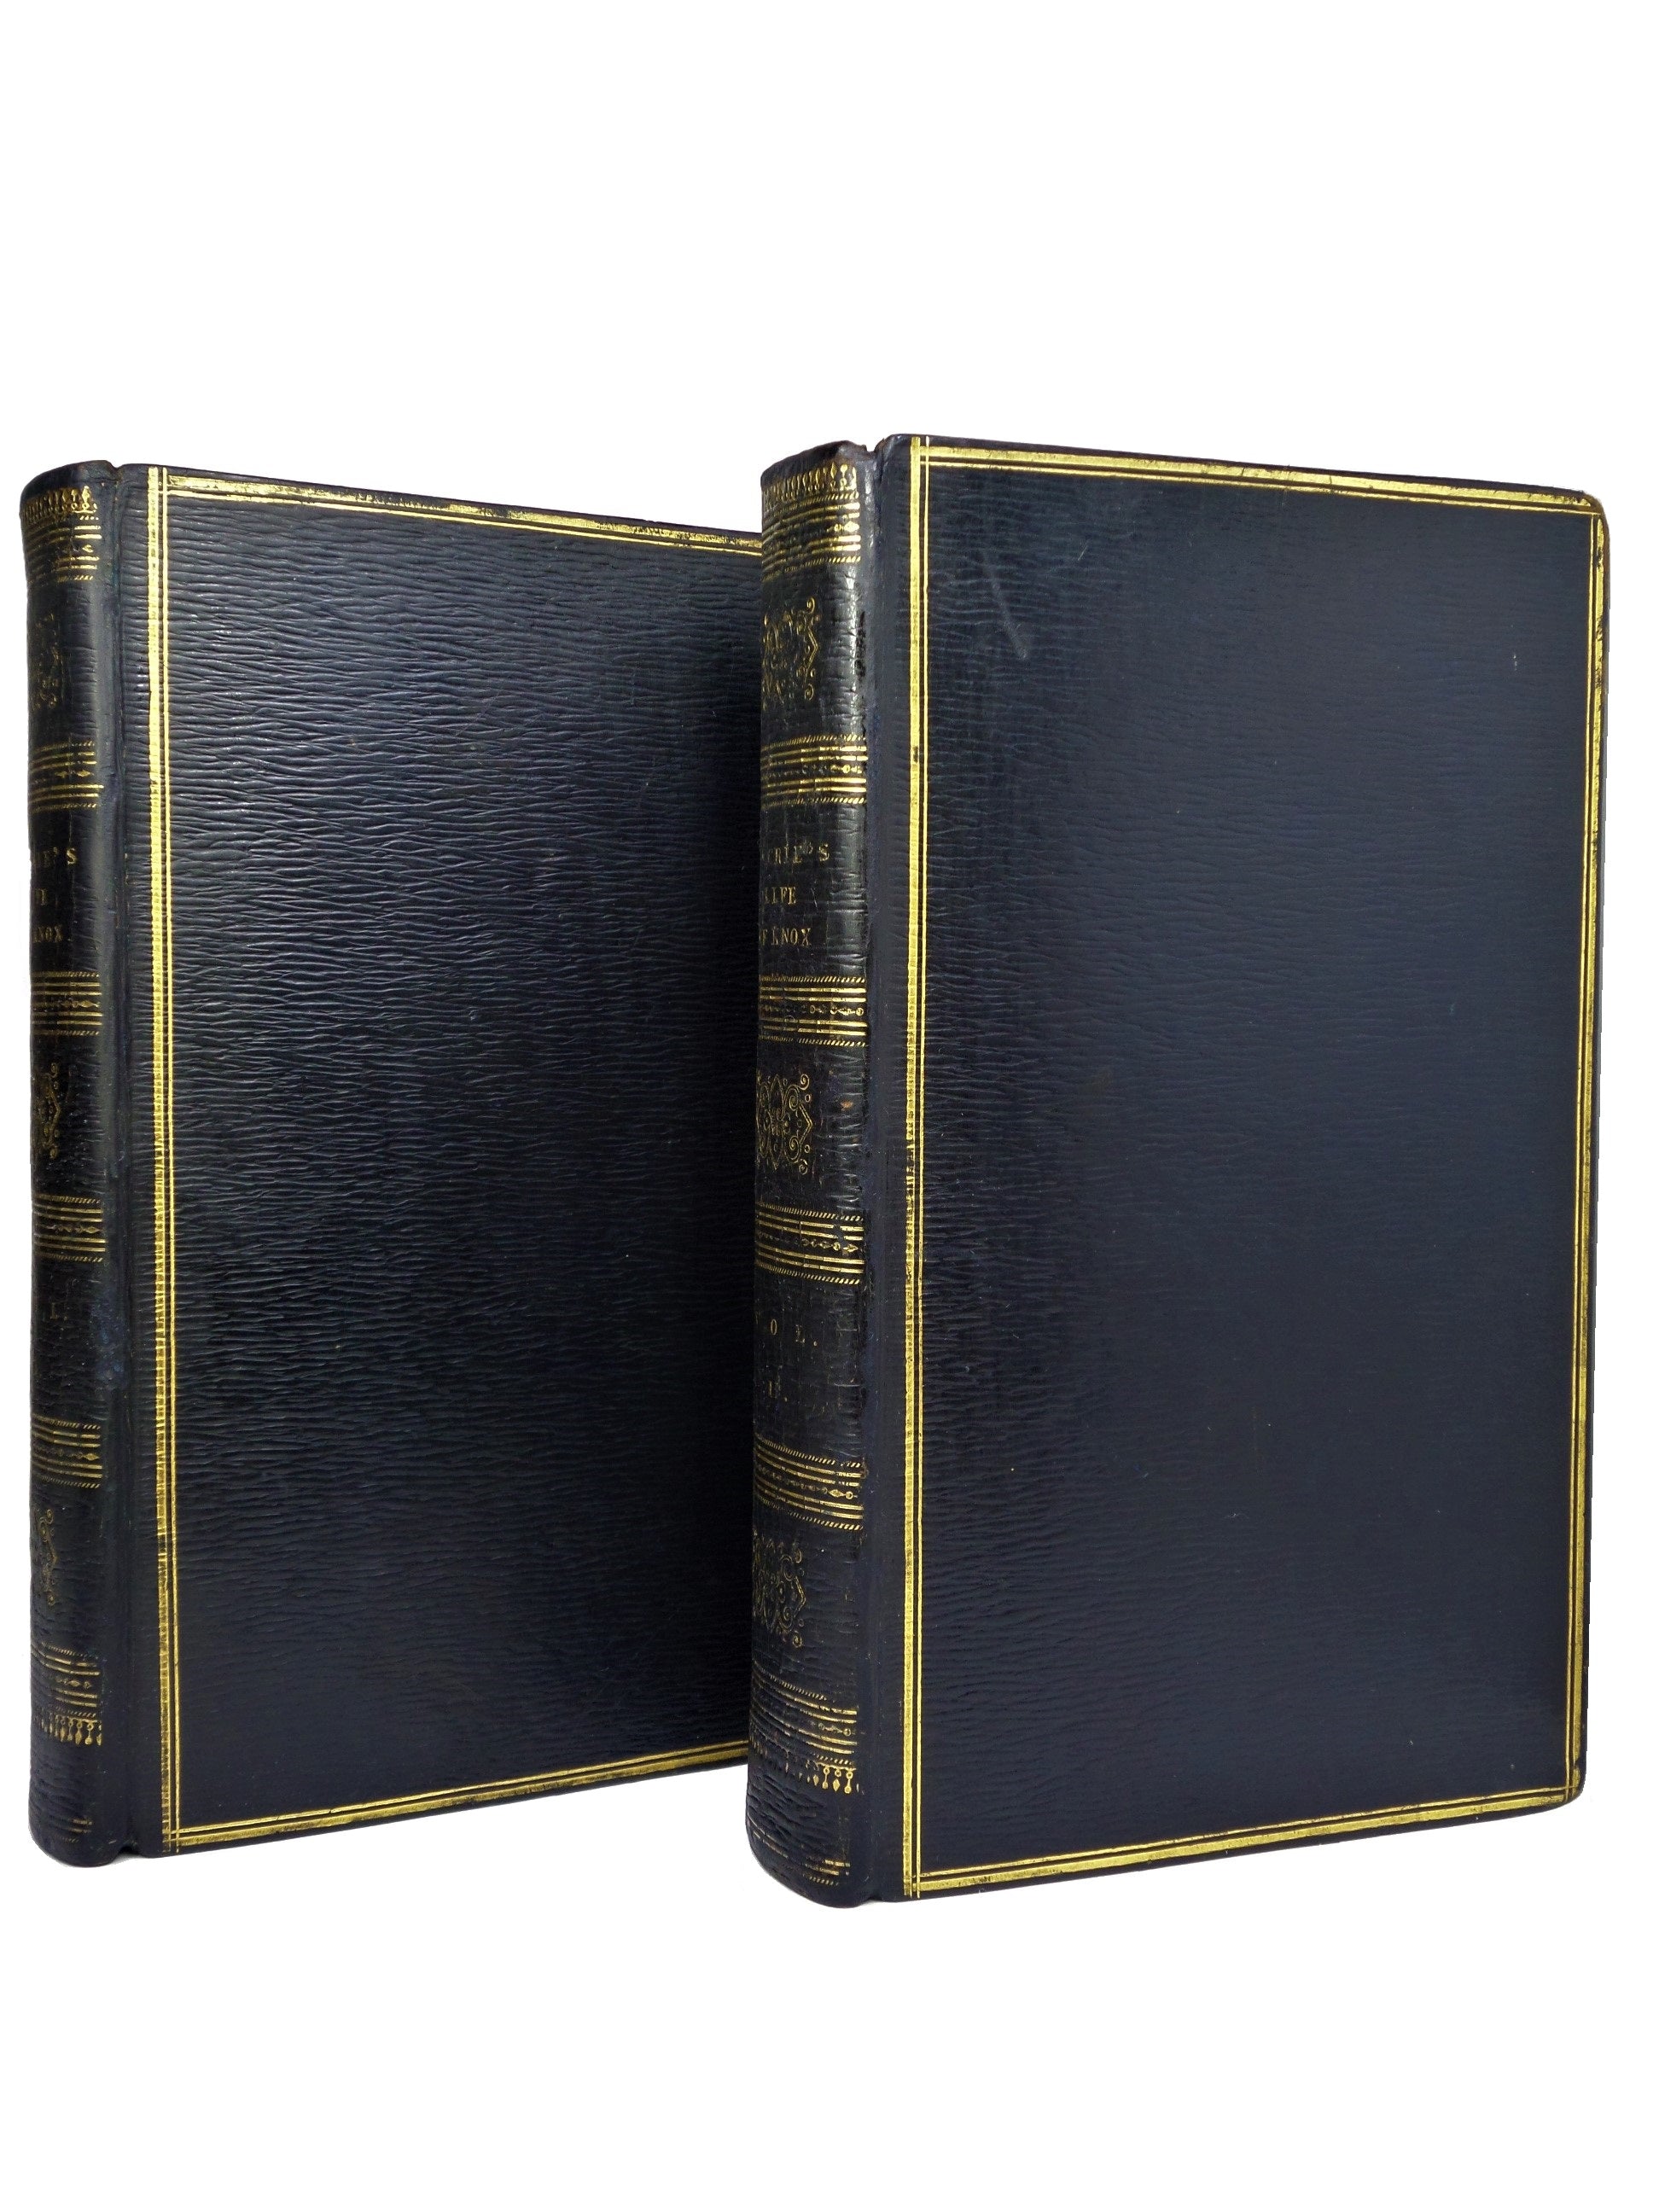 THE LIFE OF JOHN KNOX BY THOMAS M'CRIE 1818 FOURTH EDITION, LEATHER-BOUND SET